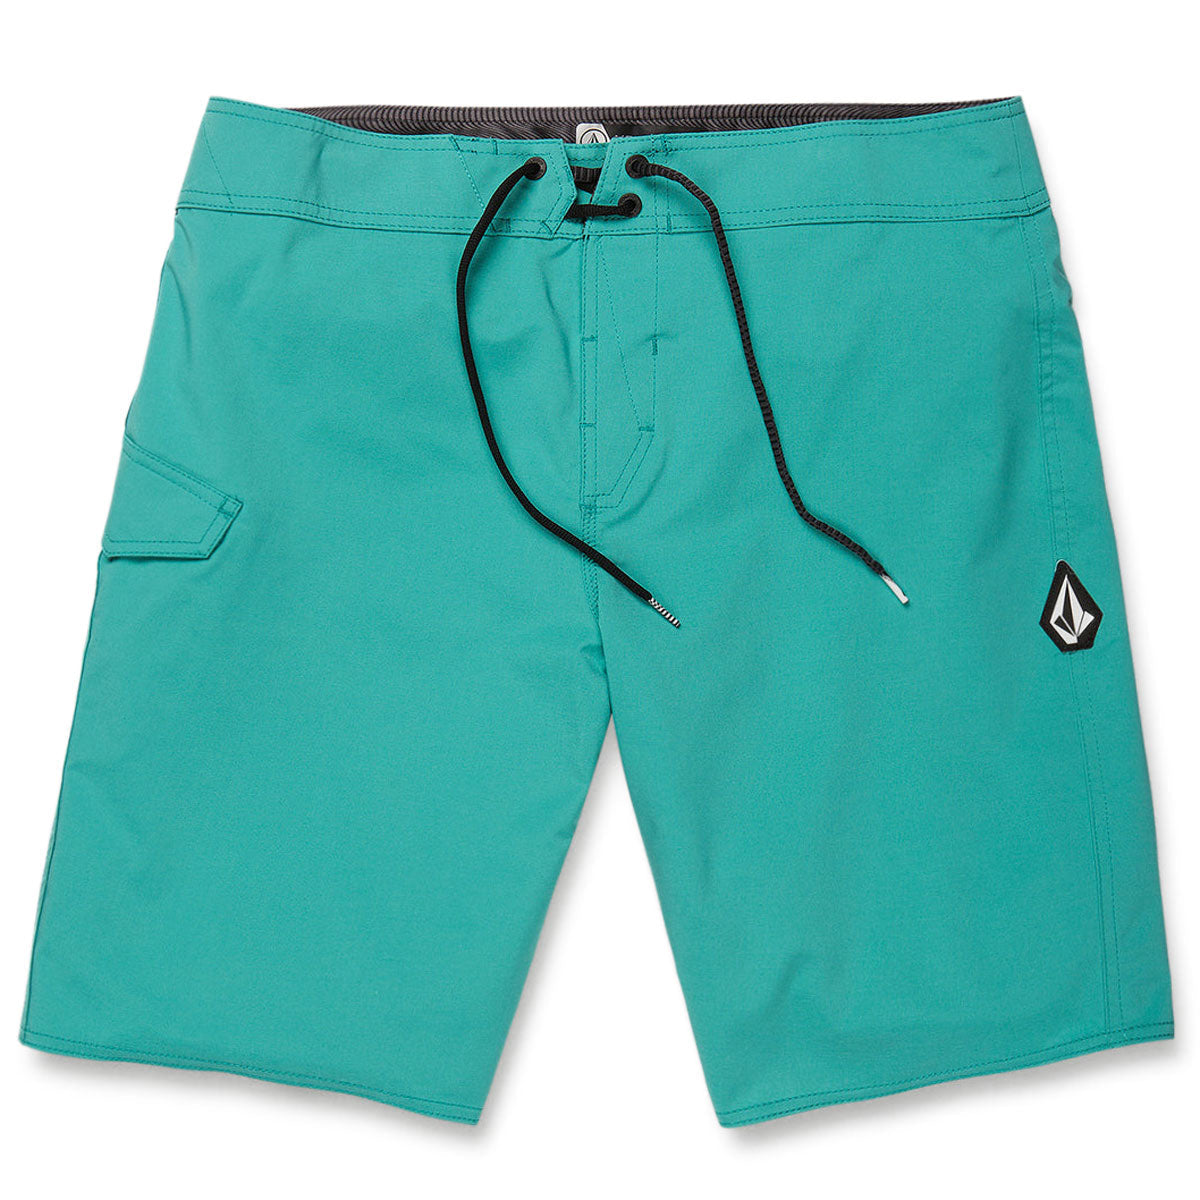 Volcom Lido Solid Mod 20 Shorts - Temple Teal image 1